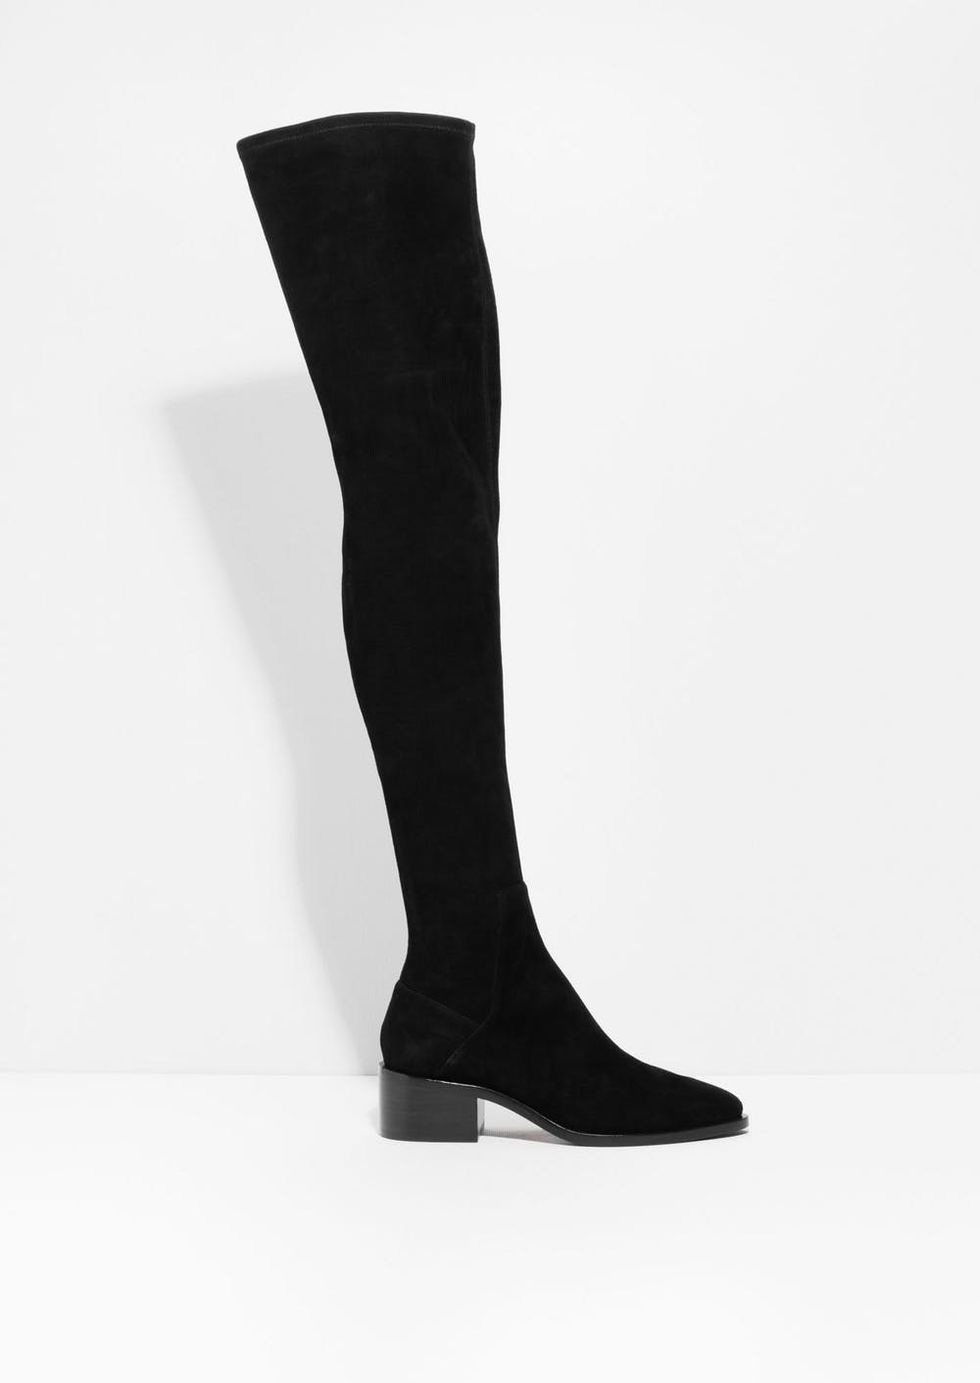 14 Anything-but-Boring Black Boots That Work All Season Long - Brit + Co